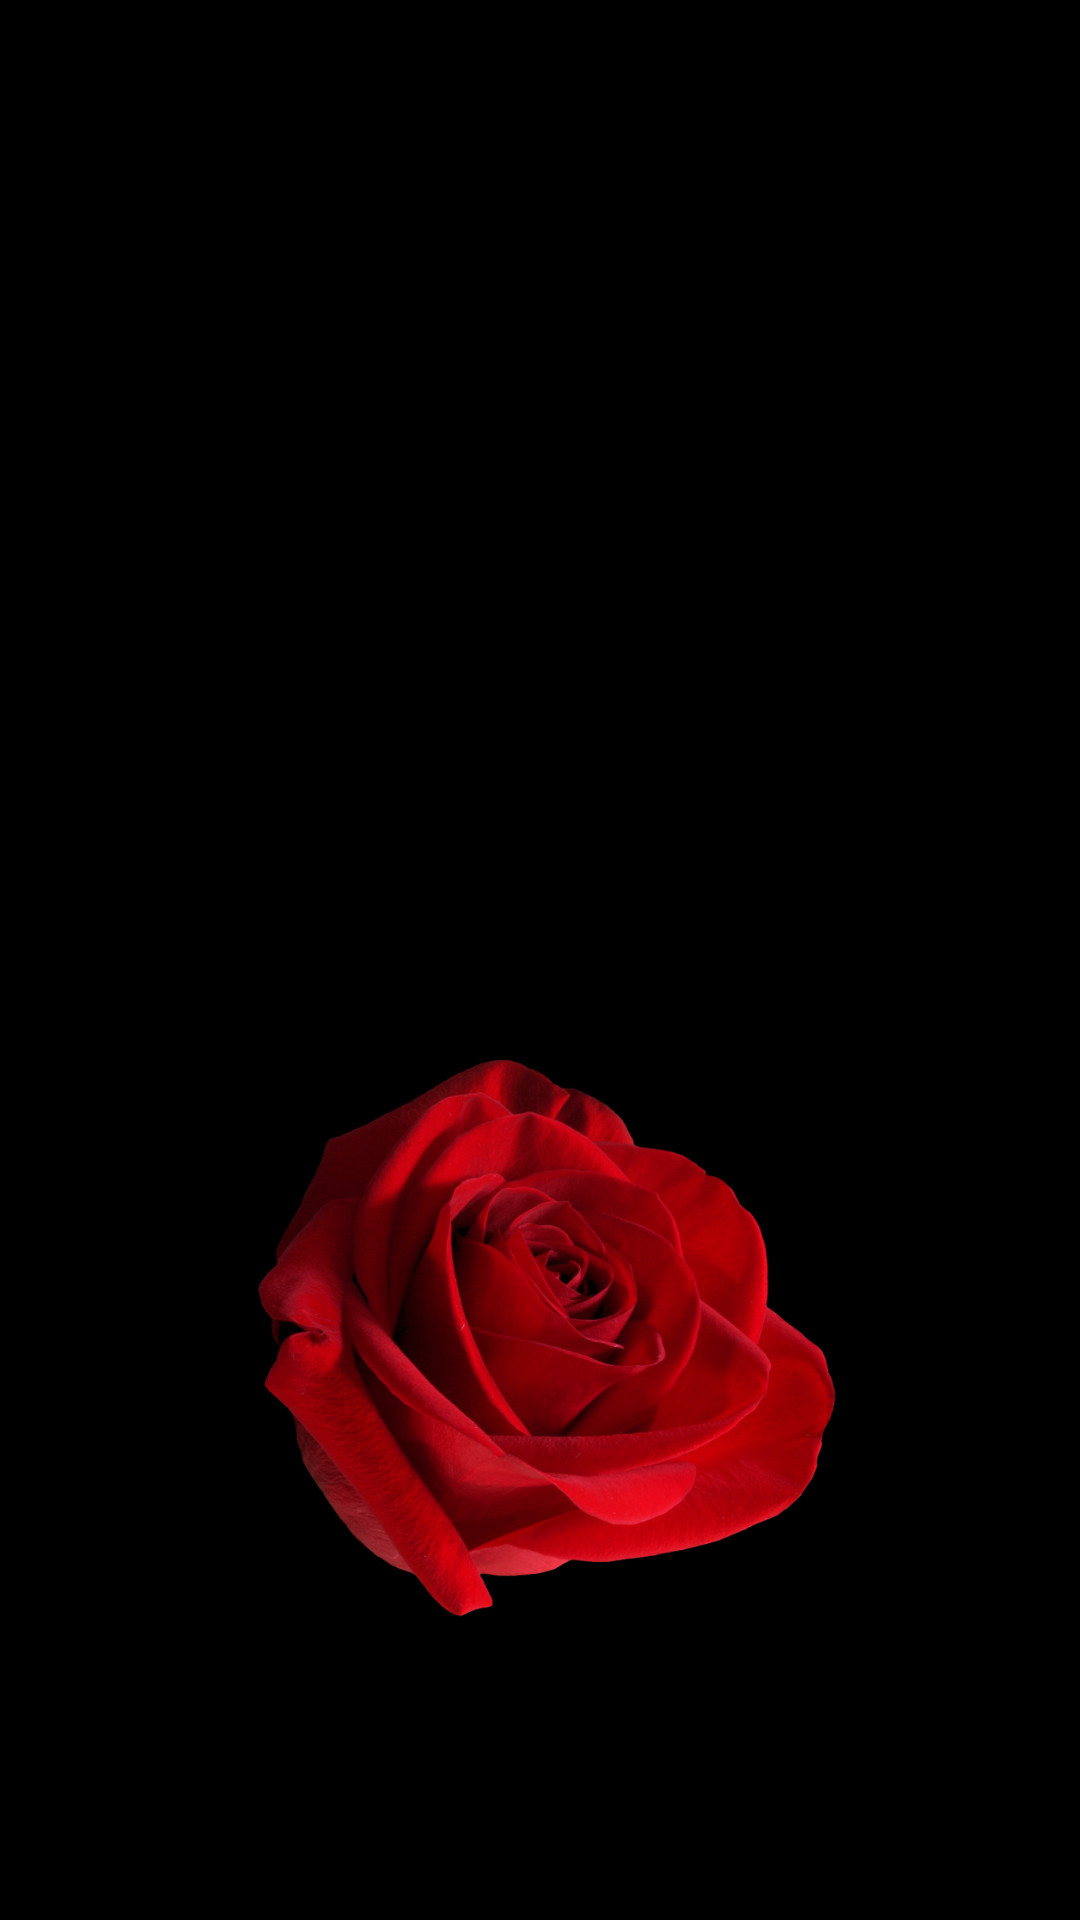 1080x1920 Red Rose Cell Phone Wallpaper by mitsubishiman on DeviantArt